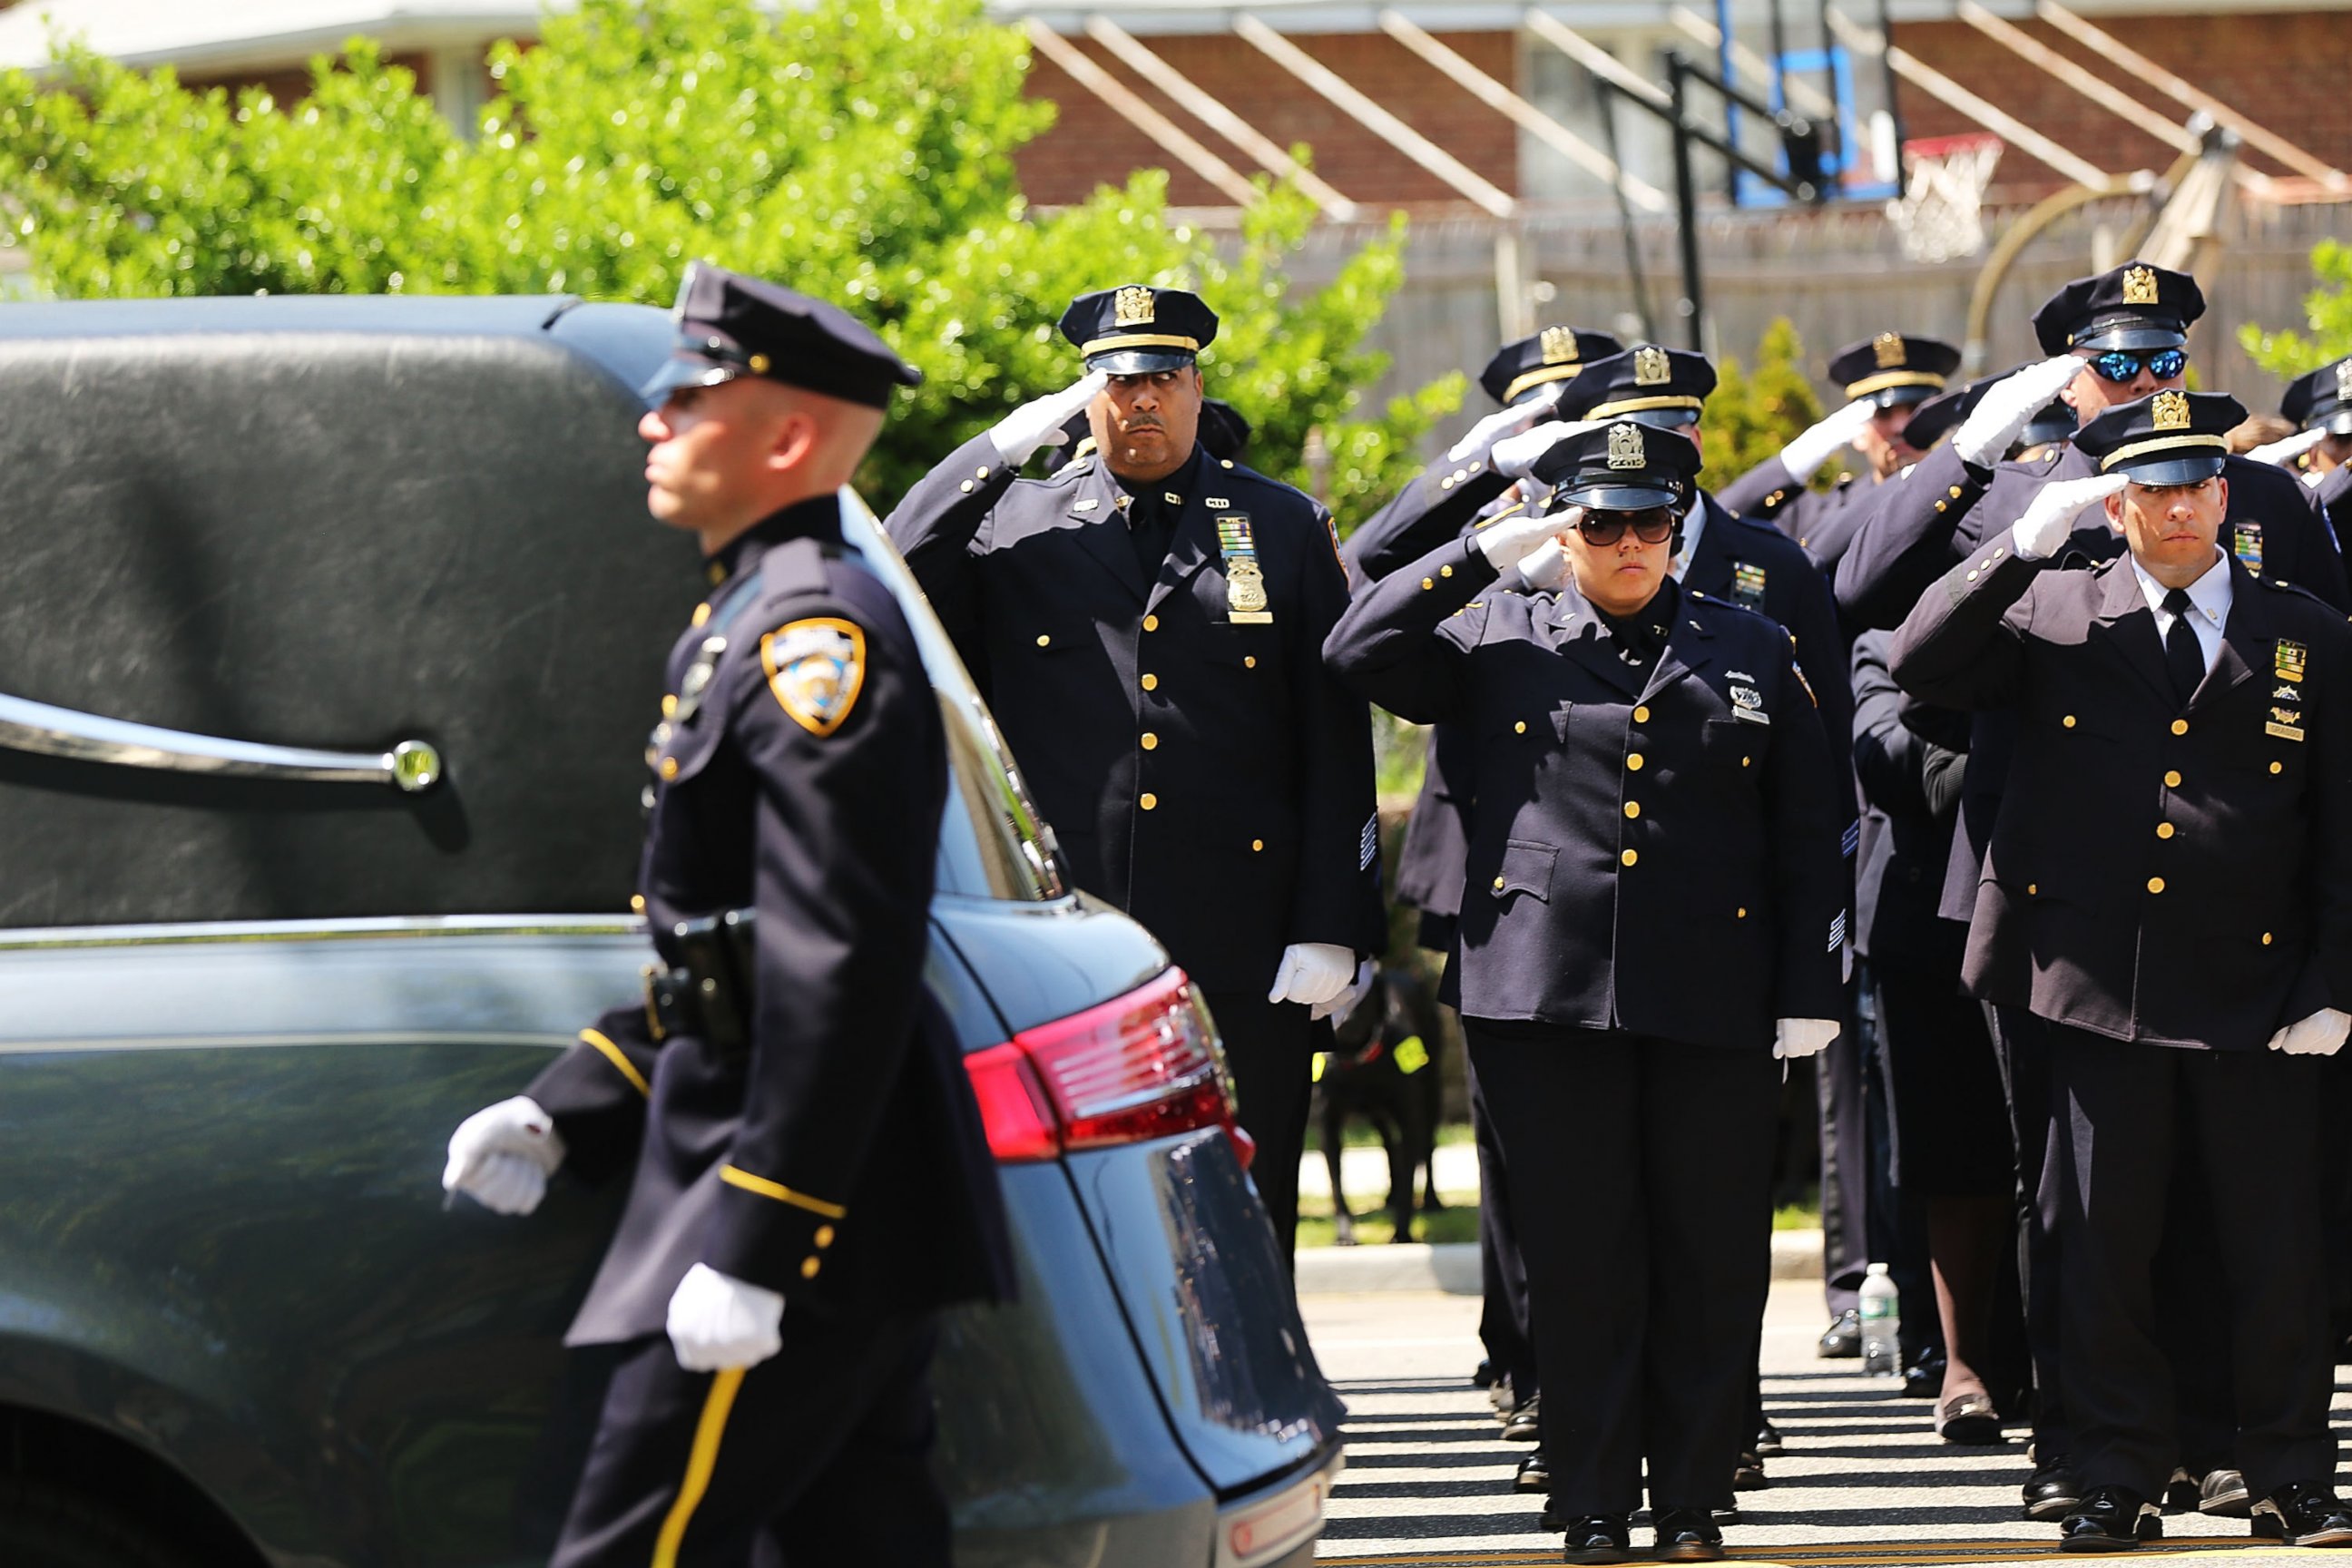 PHOTO: The hearse carrying New York City police officer Brian Moore leaves a Long Island church on May 8, 2015 in Seaford, New York.